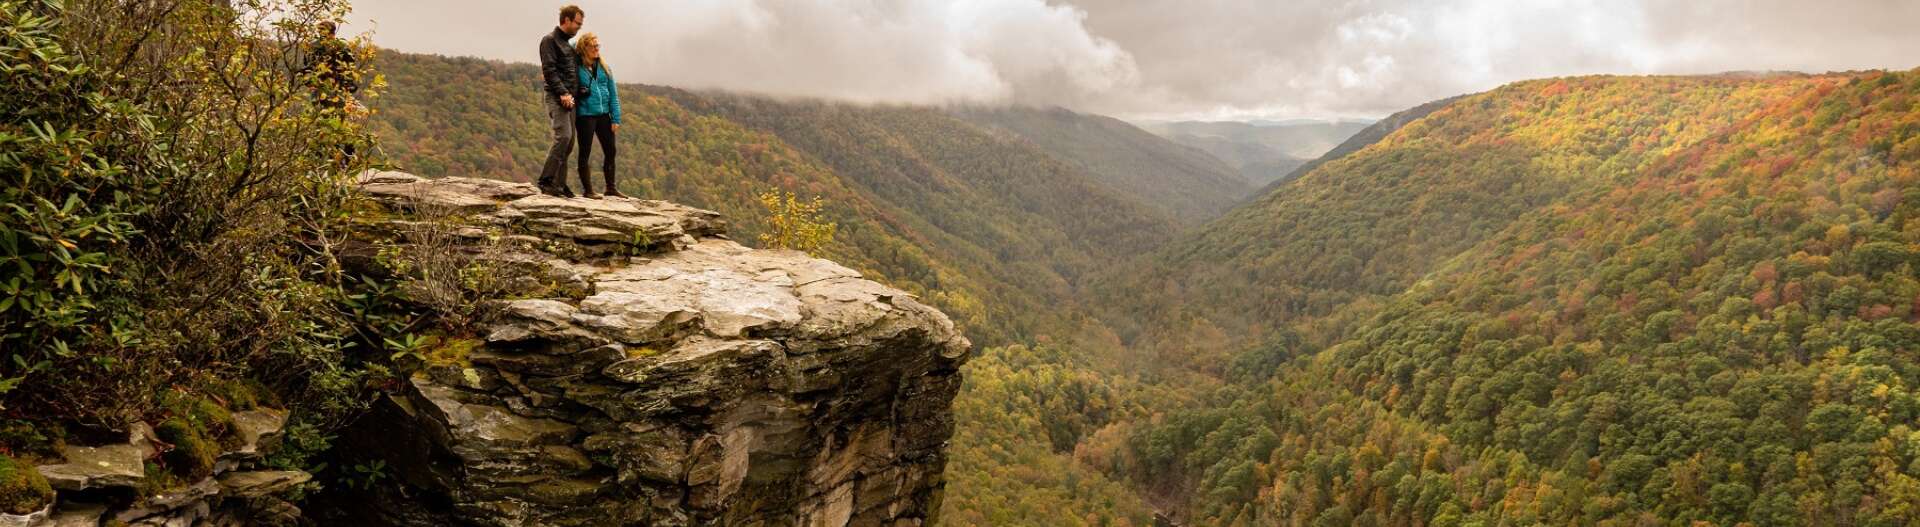 National Plan Your Vacation Day;  Tucker County, West Virginia